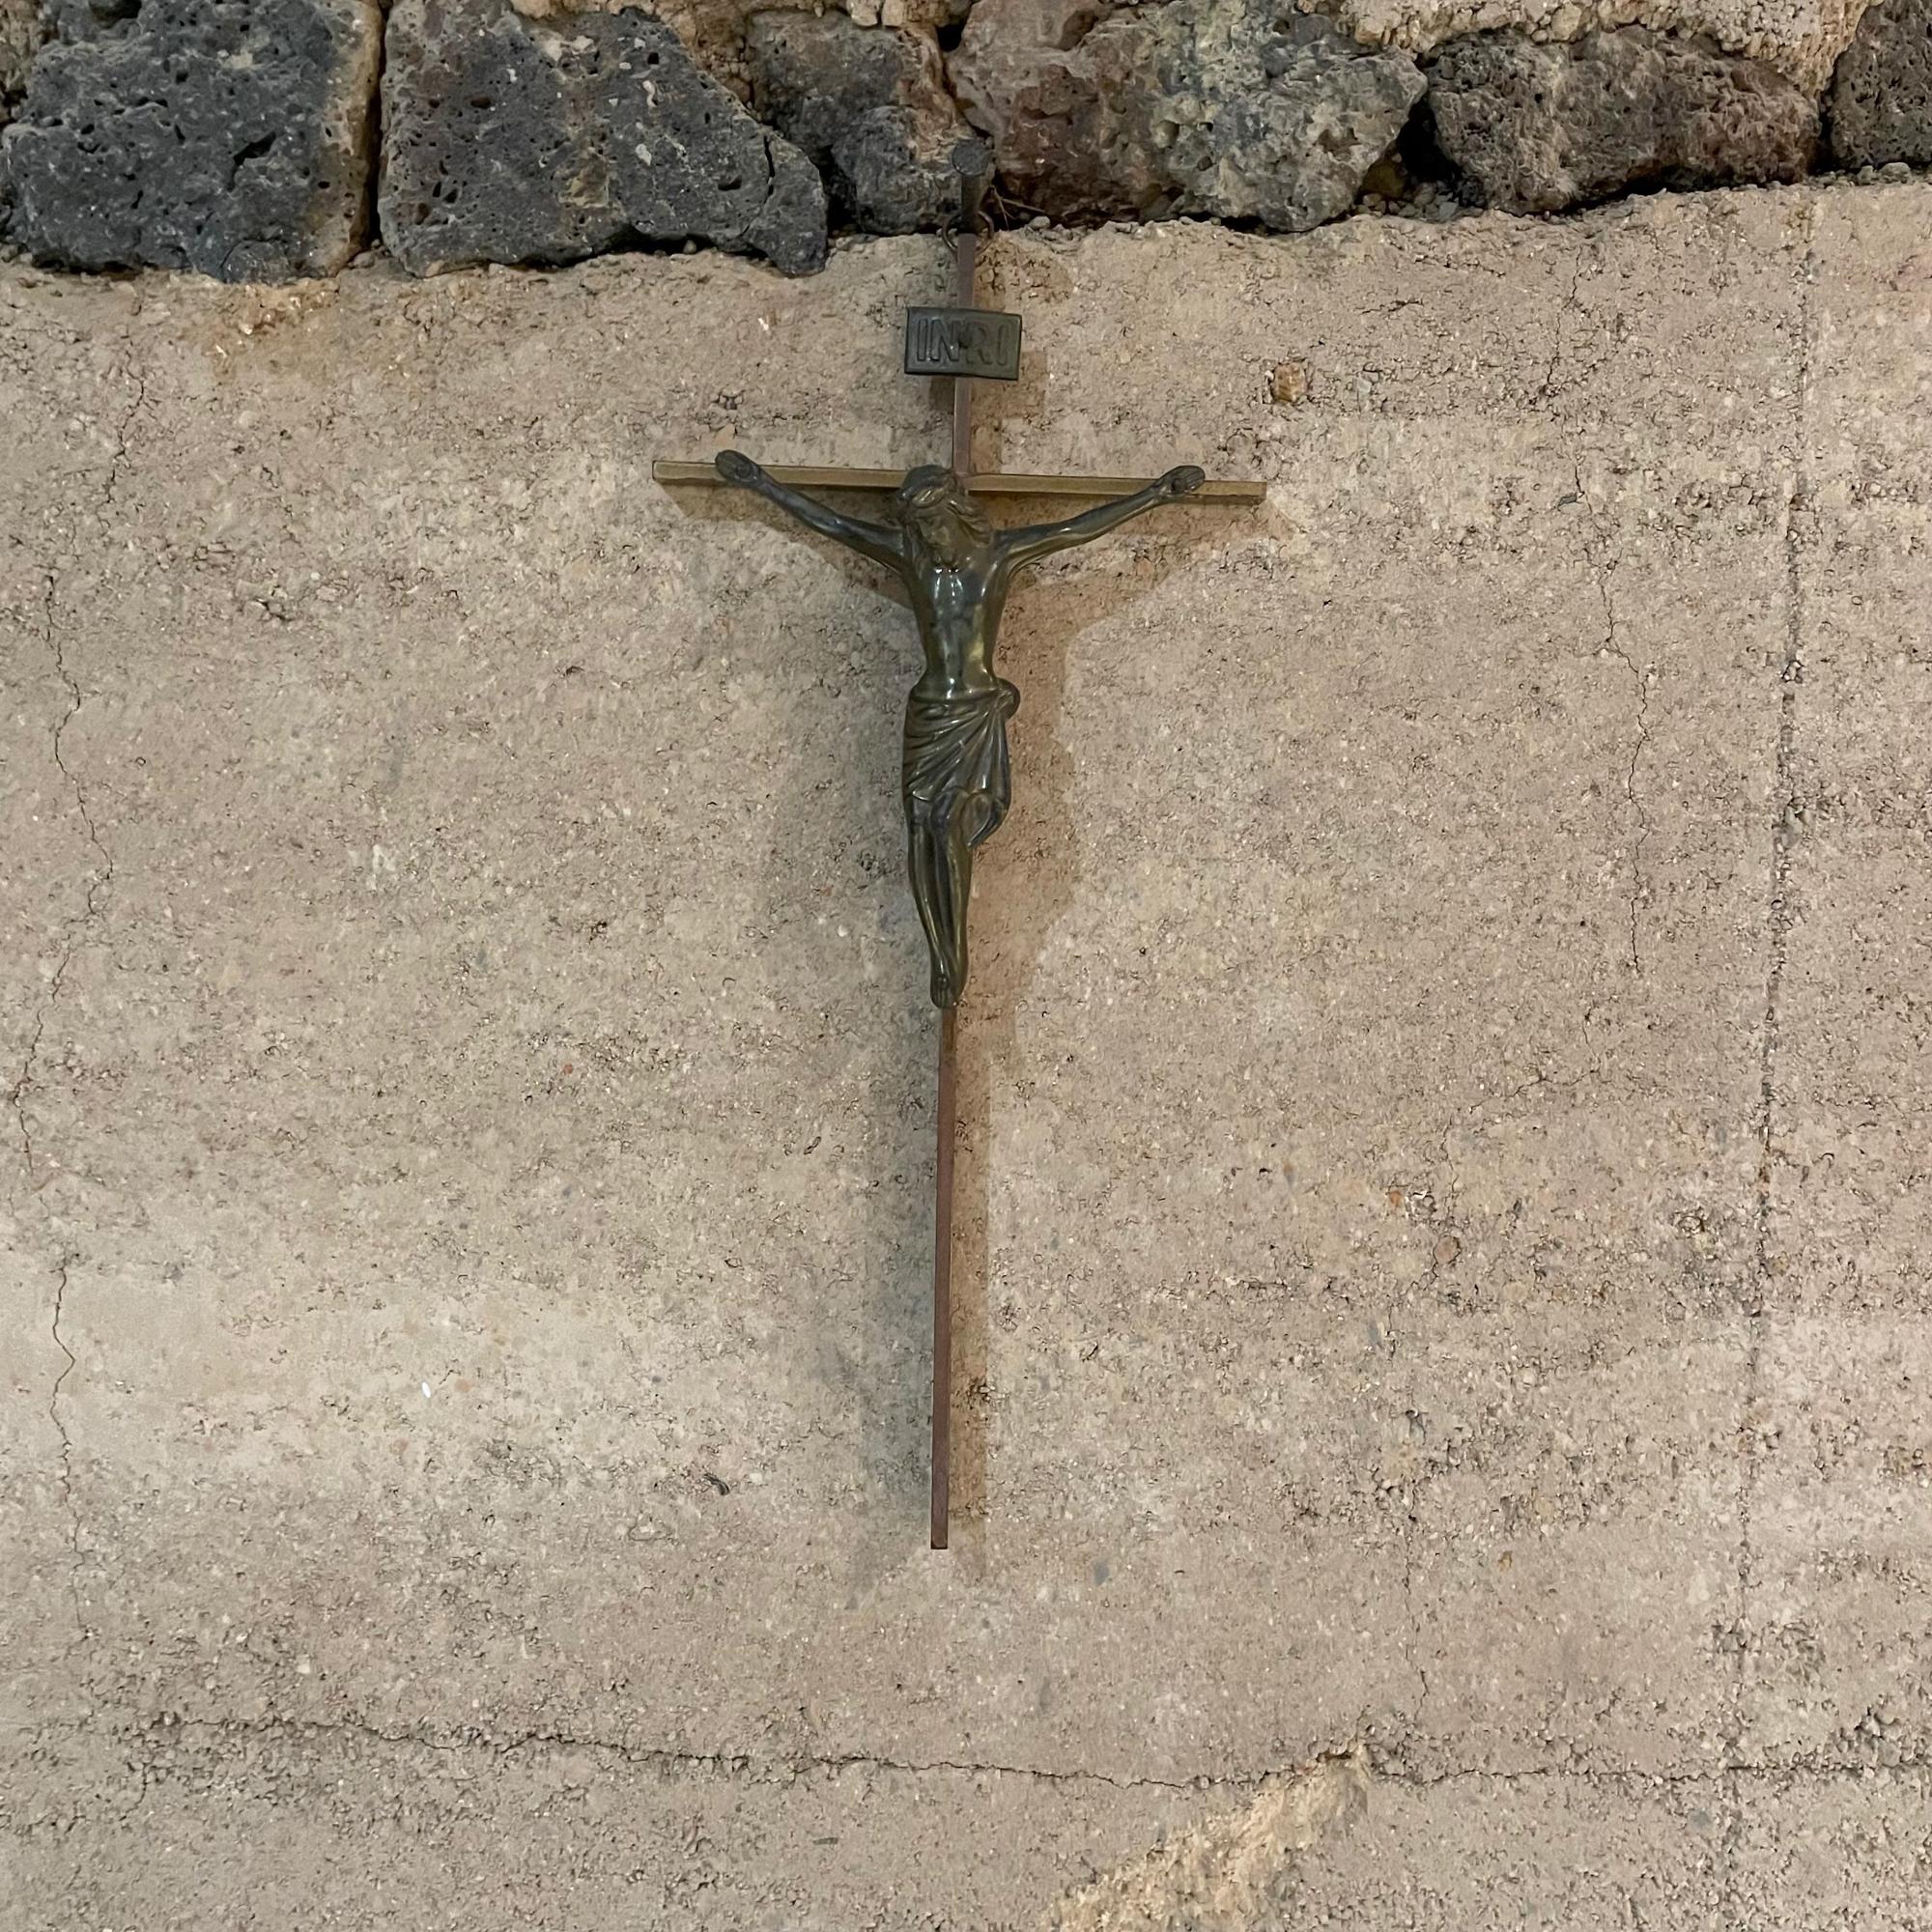 Presenting:
Patinated vintage crucifix inri solid bronze cross, stamped made in Germany.
No information on maker.
Measures: 11.75 tall x 5.38 W x 1.5 D inches
Unrestored preowned vintage condition.
See our images please.

  